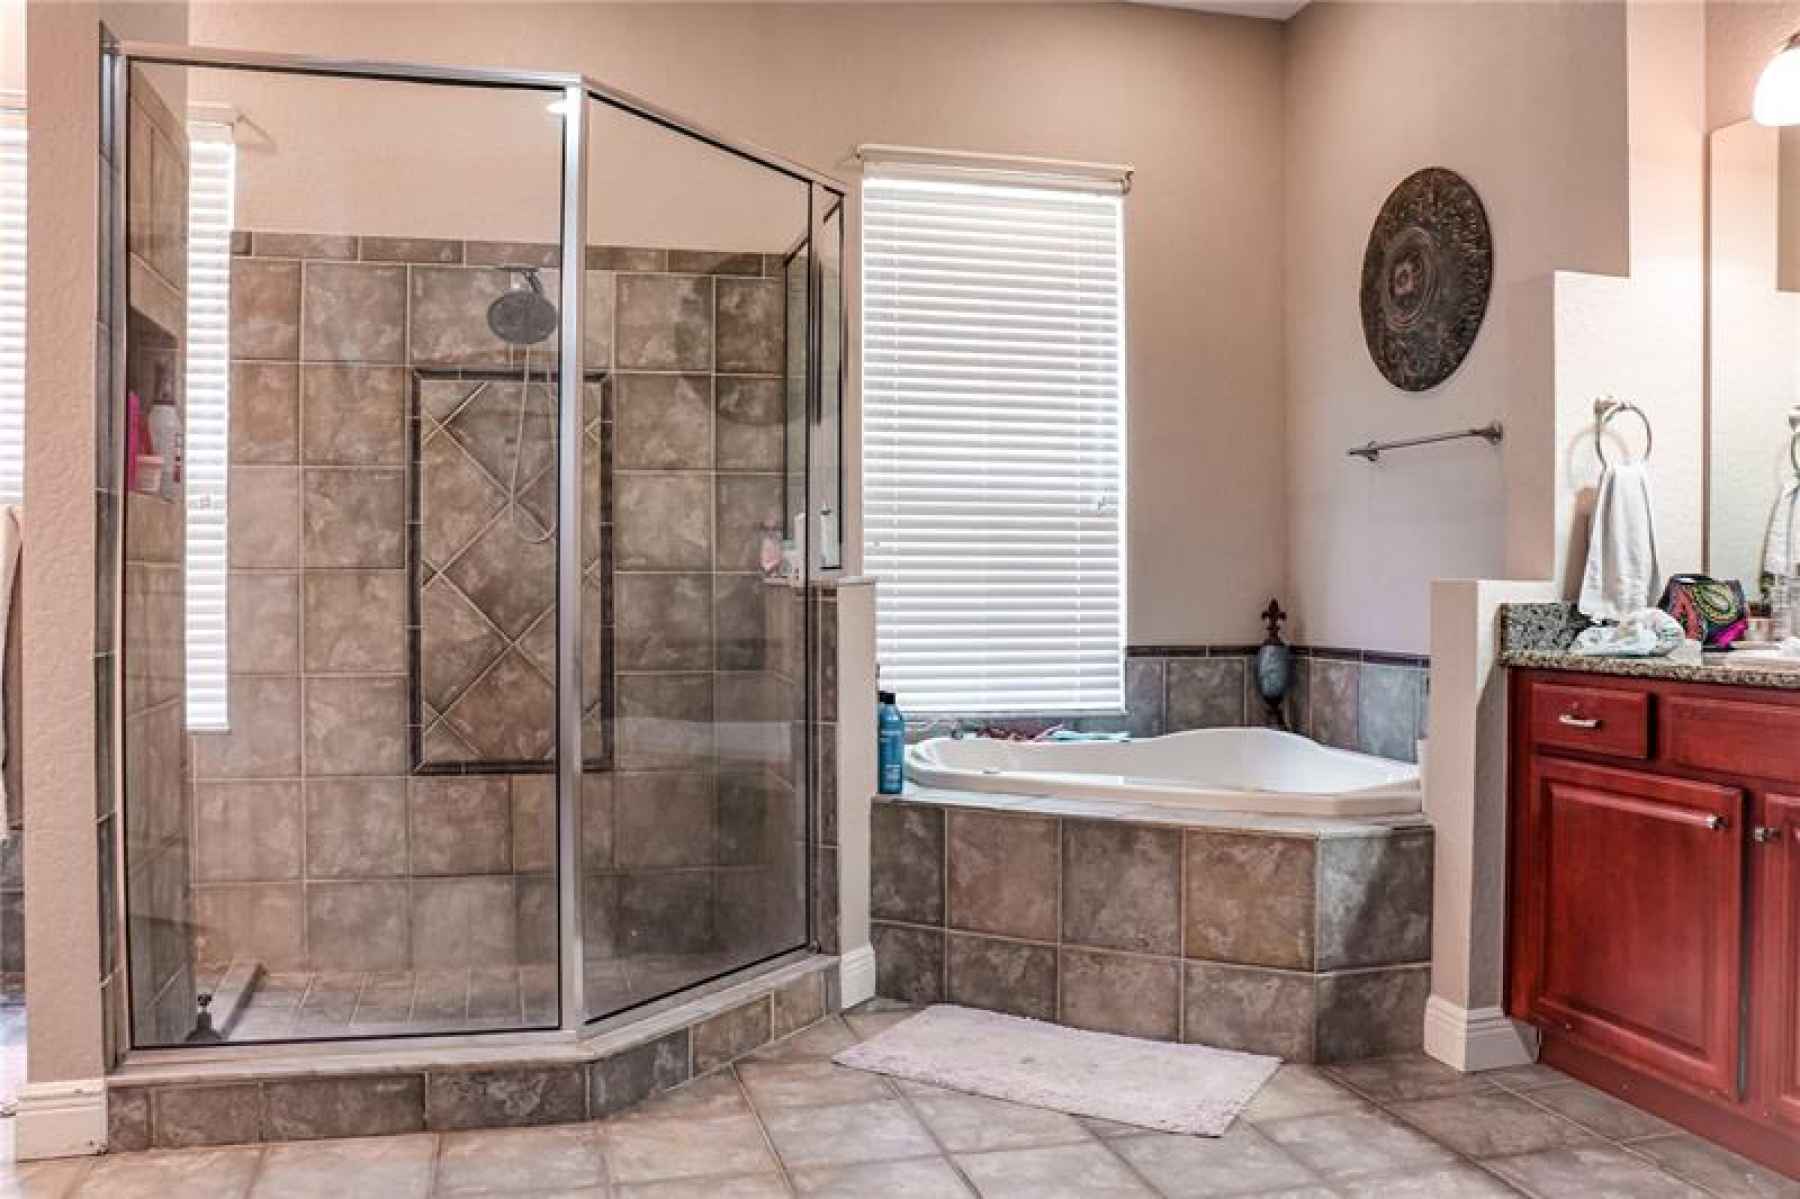 MASTER BATH WITH STEP IN SHOWER AND GARDEN TUB